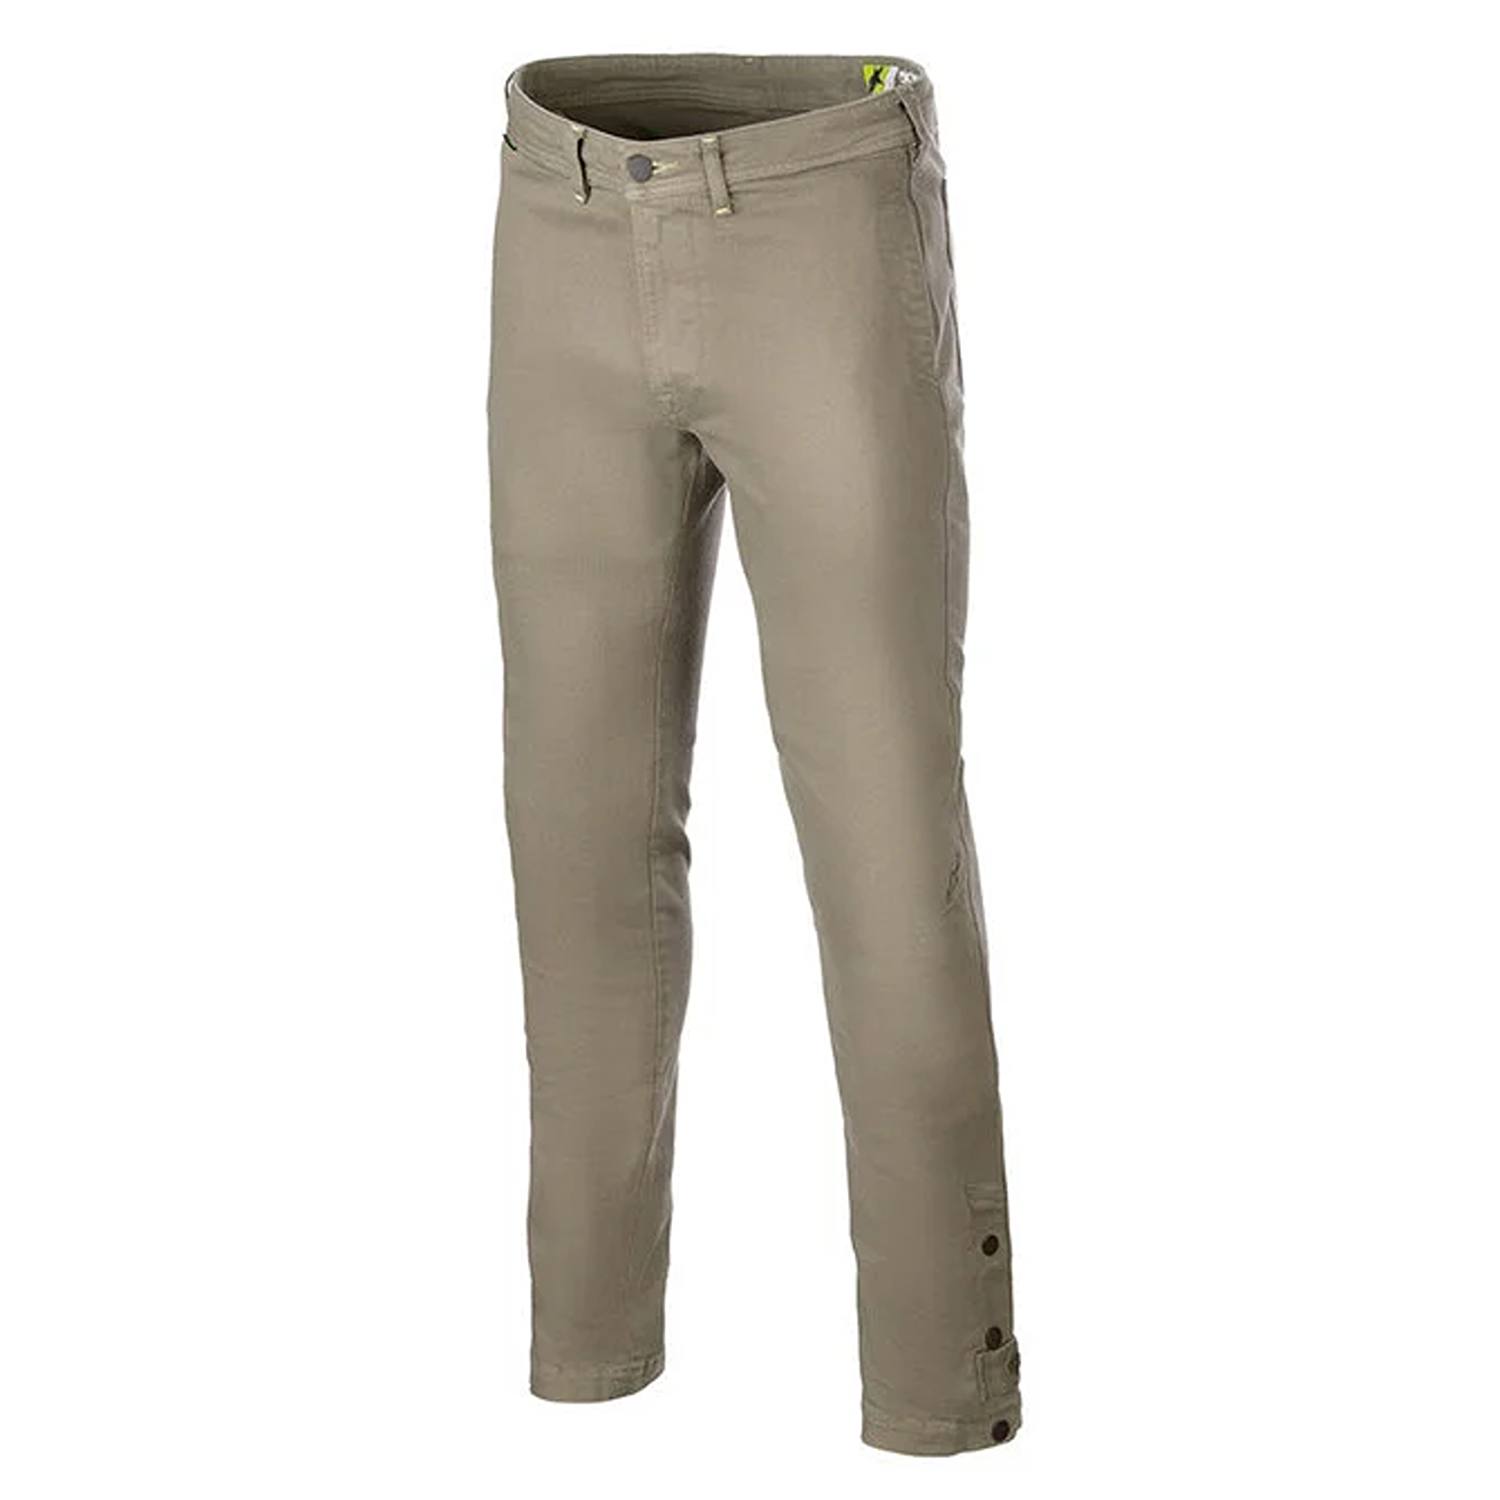 Image of Alpinestars Stratos Regular Fit Tech Riding Pants Military Green Taille 28